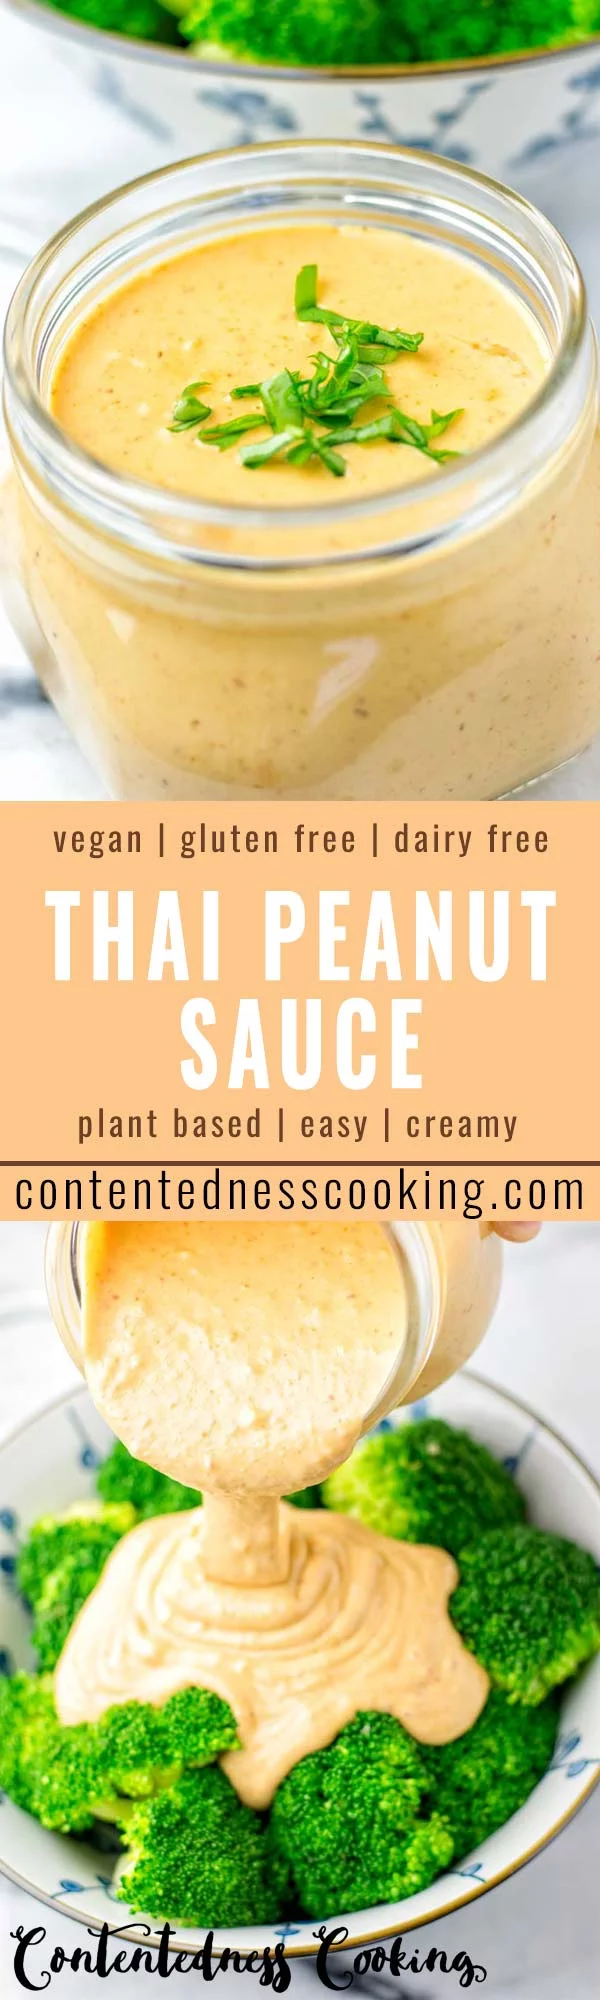 This Thai Peanut Sauce with Basil is naturally vegan, gluten free and super easy to make in less than 5 minutes. So versatile and a keeper for all your veggies, pasta and of course for your salads as a Thai Peanut dressing. Also the best for dinner, lunch, meal preparation and work lunches. #vegan #dairyfree #glutenfree #contentednesscooking #dinner #lunch #worklunchideas #vegetarian #thaipeanutsauce #budgetfriendlymeals #familydinnerideas 